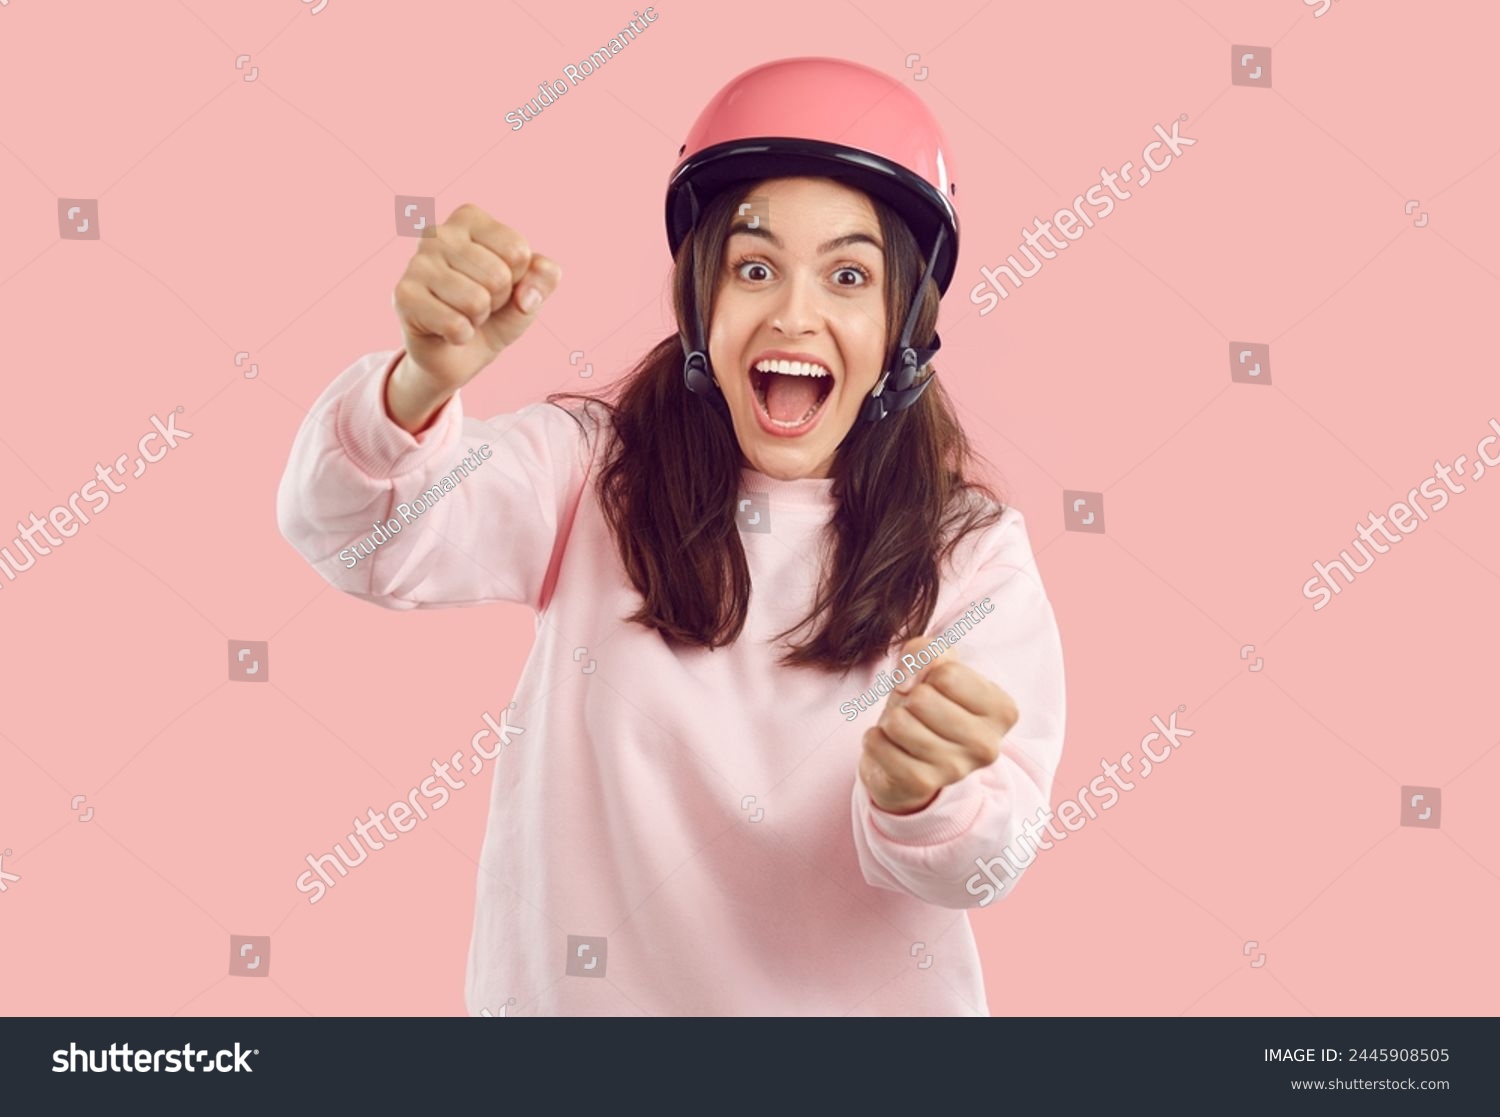 Crazy smiling amazed woman with opened mouth in helmet imagines she is driving and holding steering wheel on pink background. She is wearing pink sweatshirt. Human emotions, energy, drive concept. #2445908505